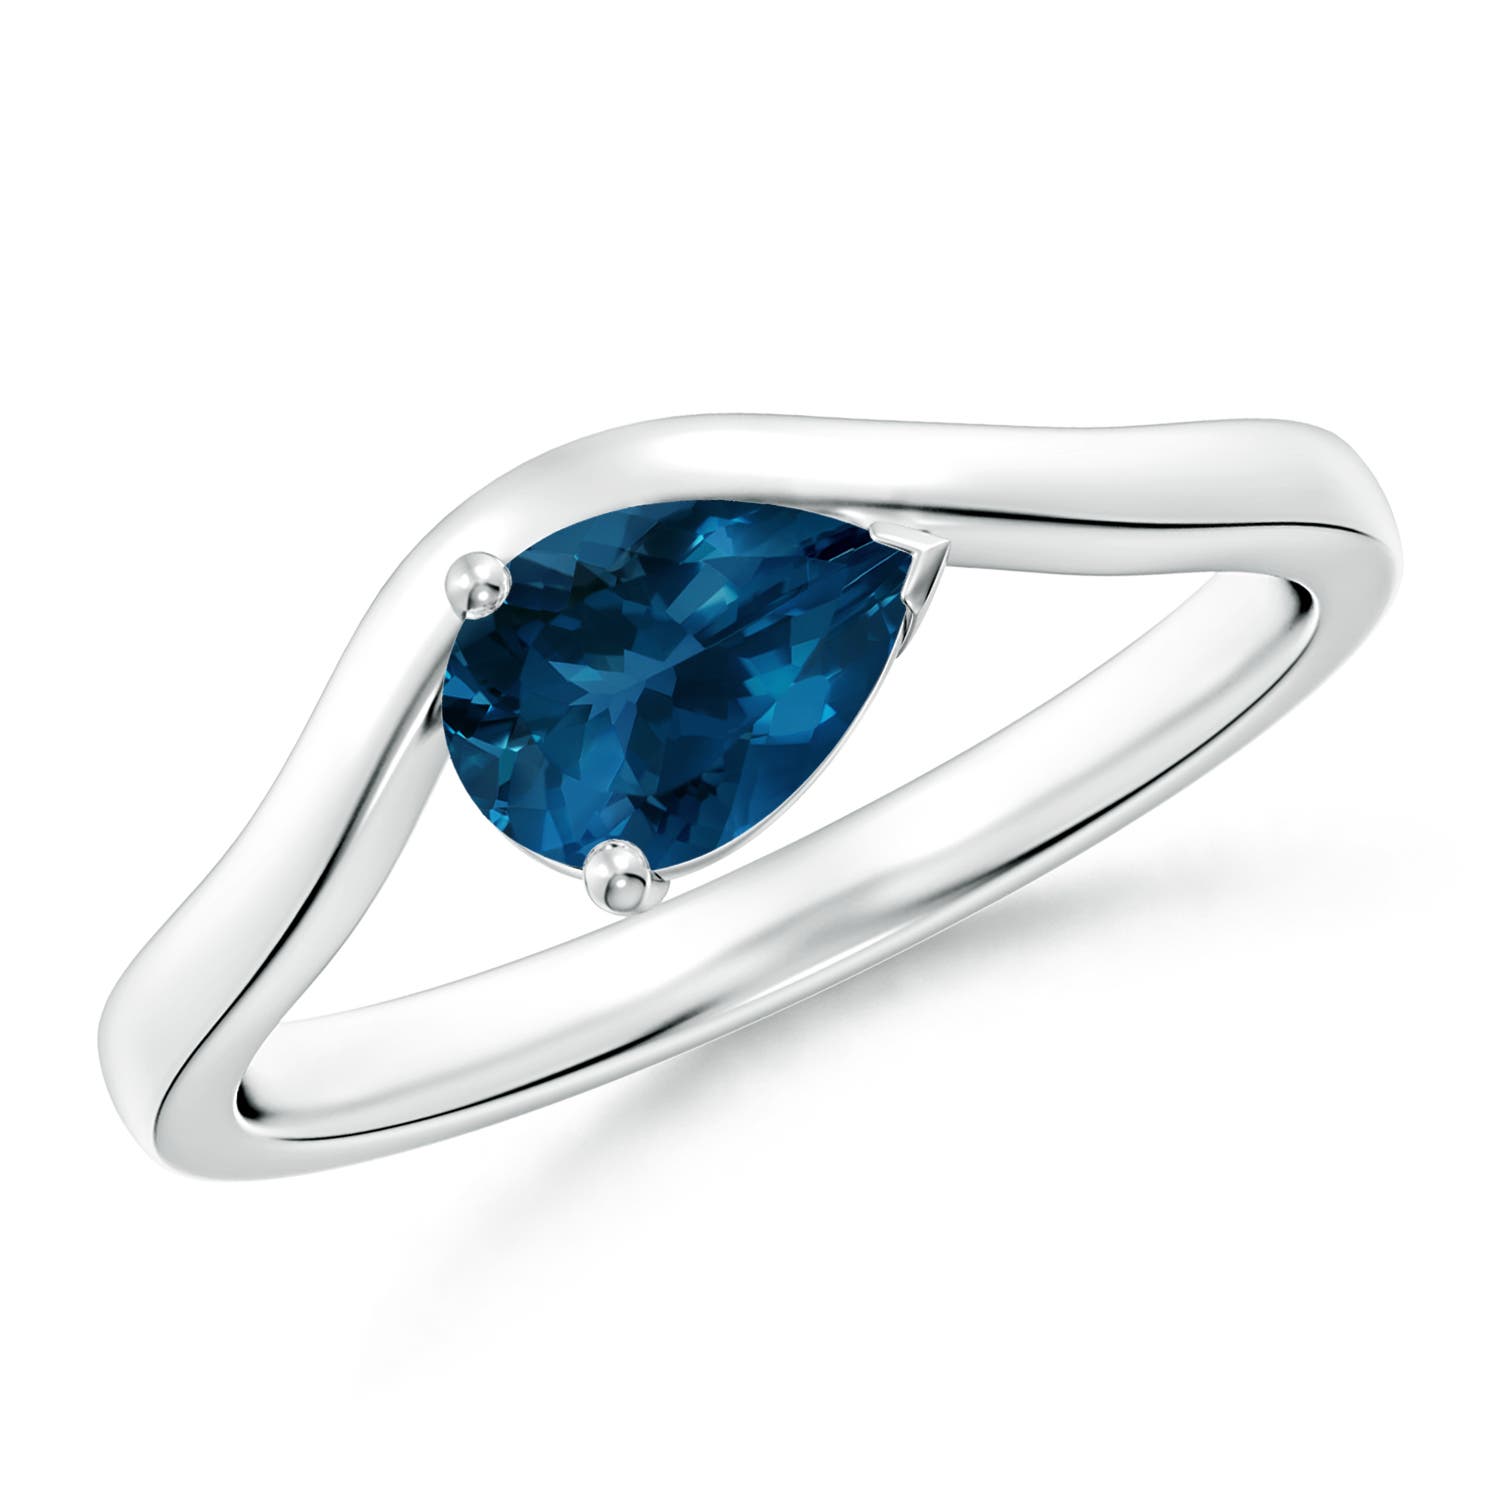 East-West Pear London Blue Topaz Wave Shank Solitaire Ring